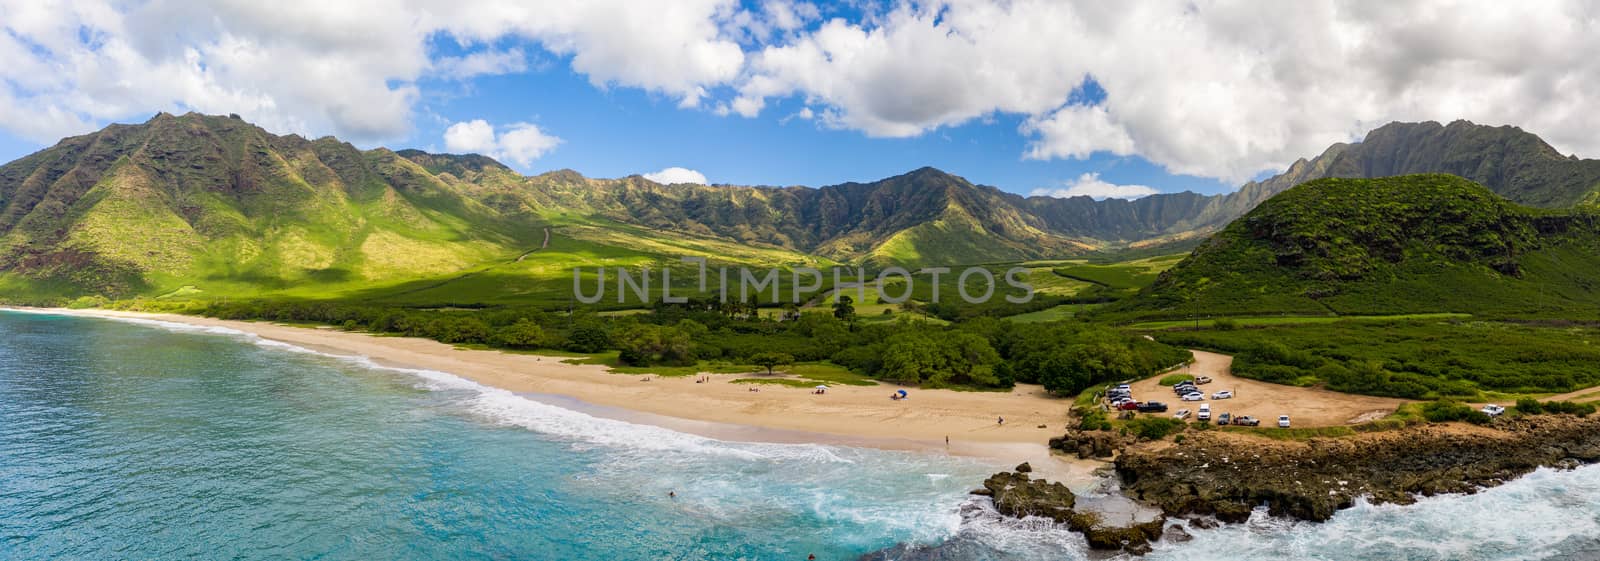 Makua beach and valley on west coast of Oahu in aerial shot over ocean by steheap